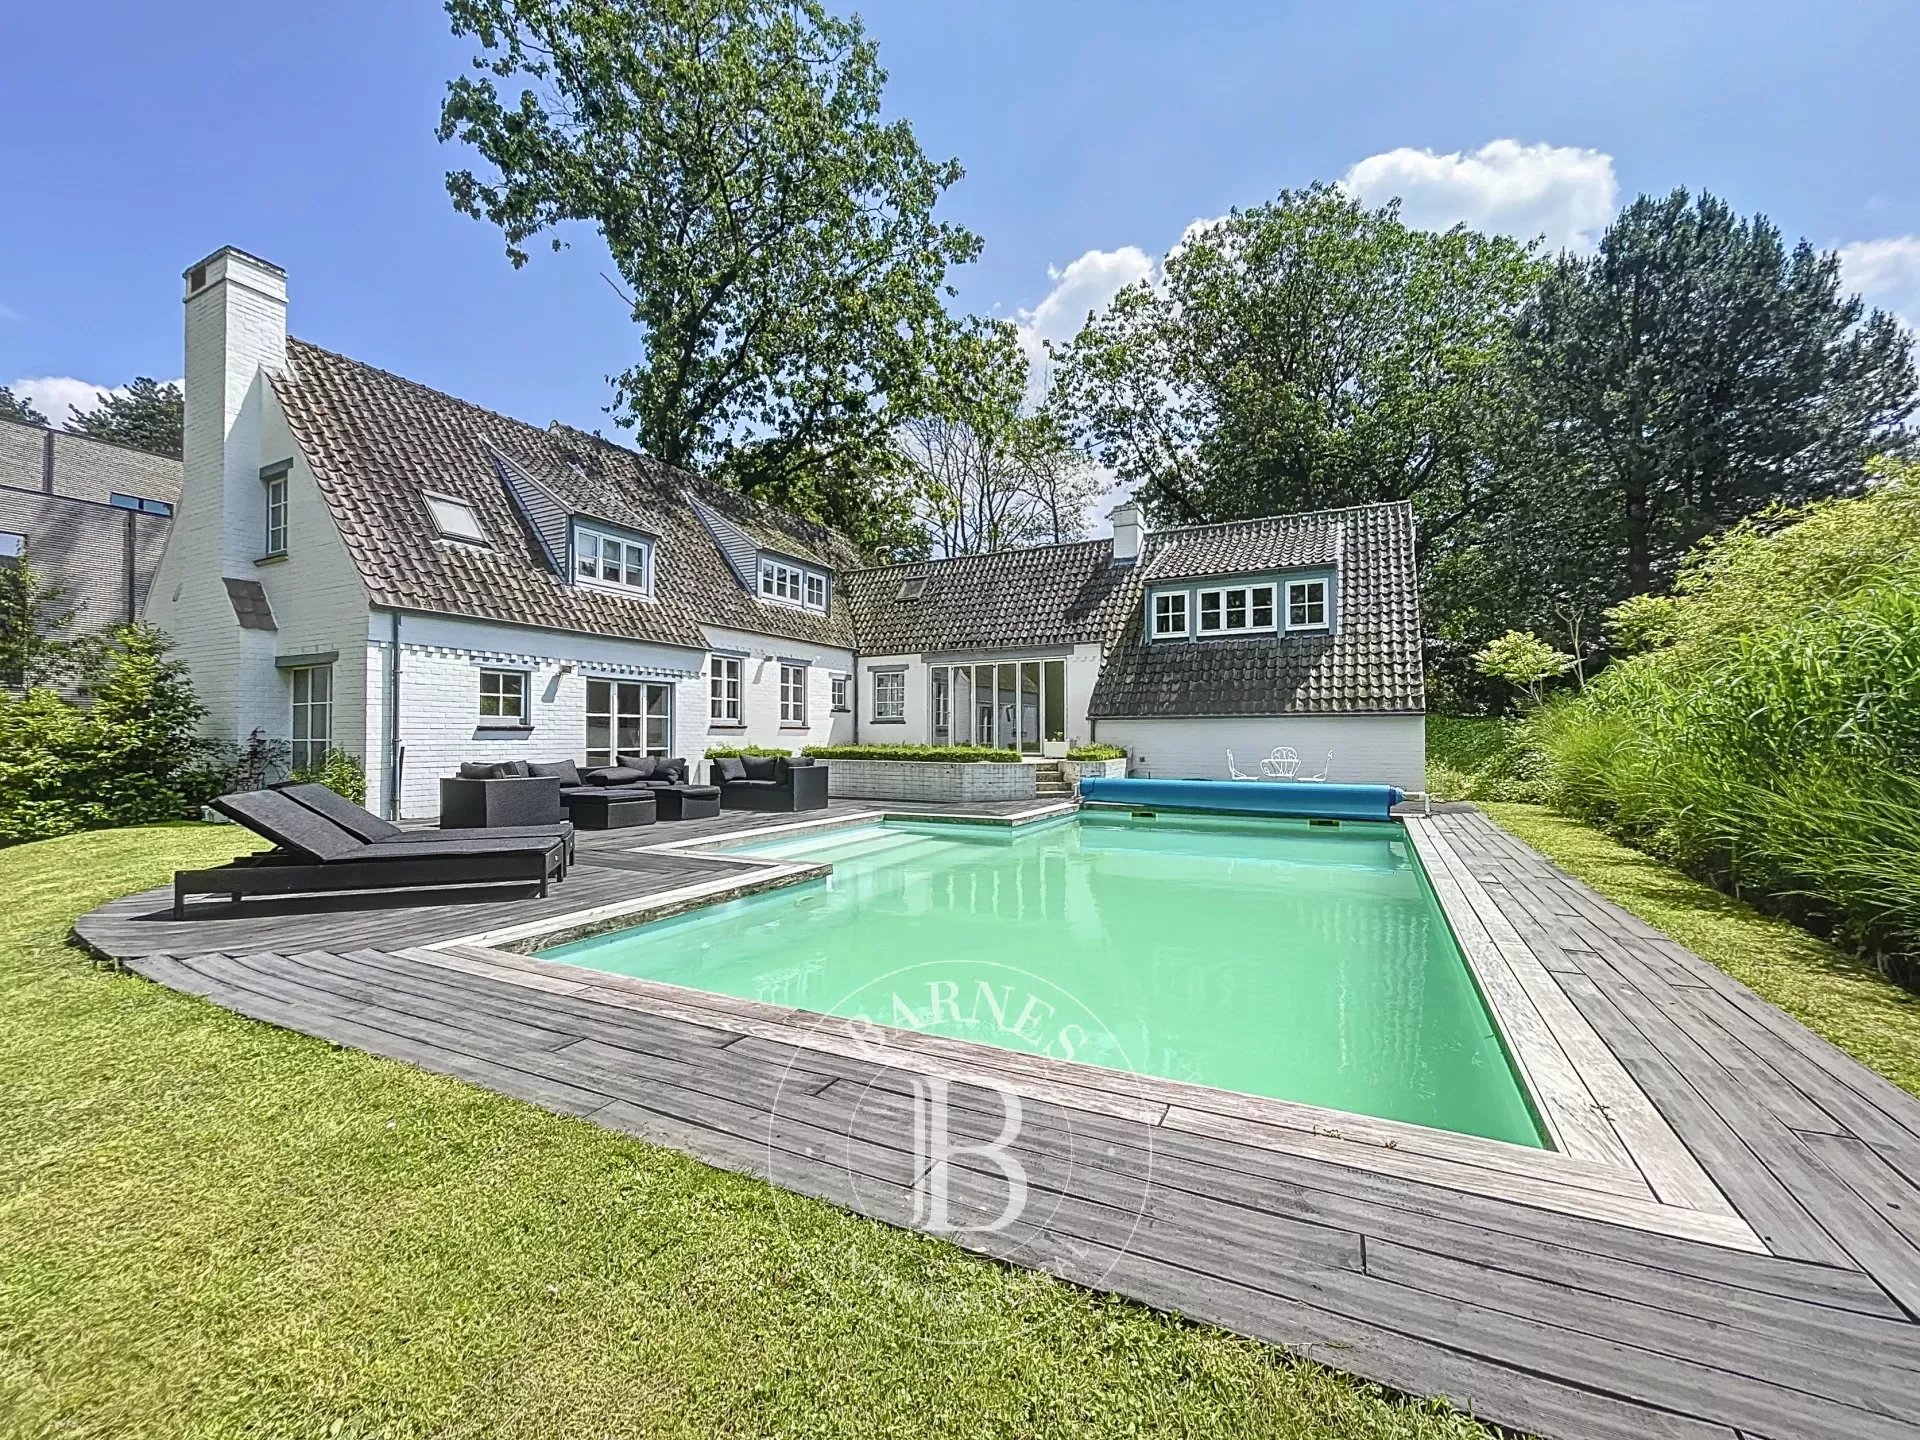 Charming villa with swimming pool and garages, close to the Forêt de Soignes